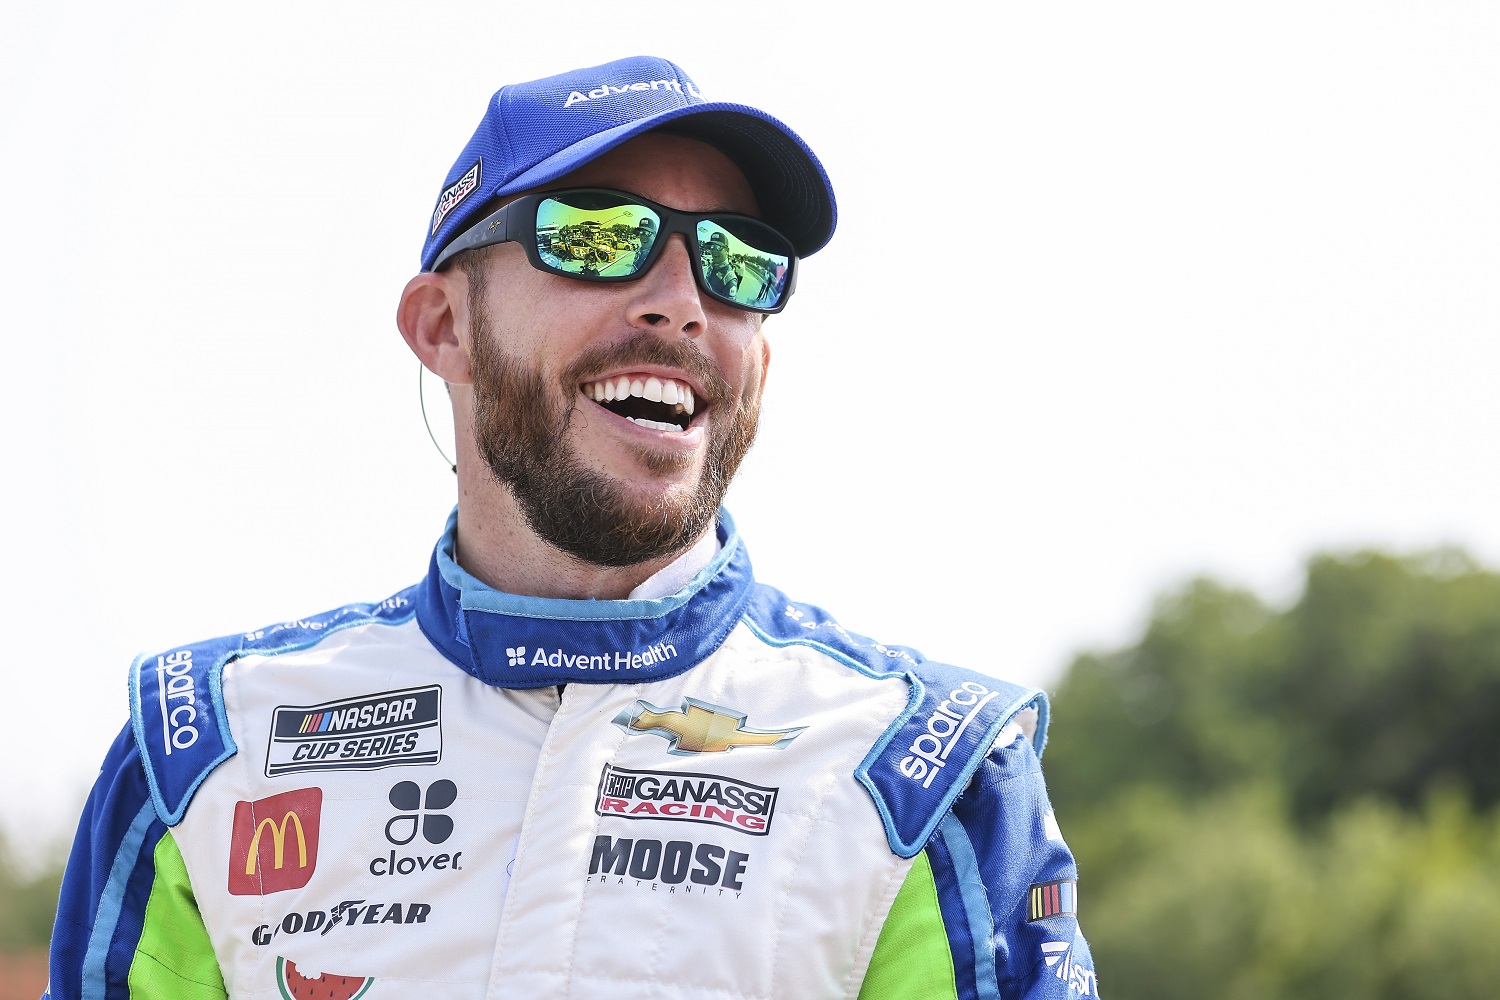 Ross Chastain laughs on the grid during qualifying for the NASCAR Cup Series race at Road America on July 4, 2021, in Elkhart Lake, Wisconsin. | James Gilbert/Getty Images